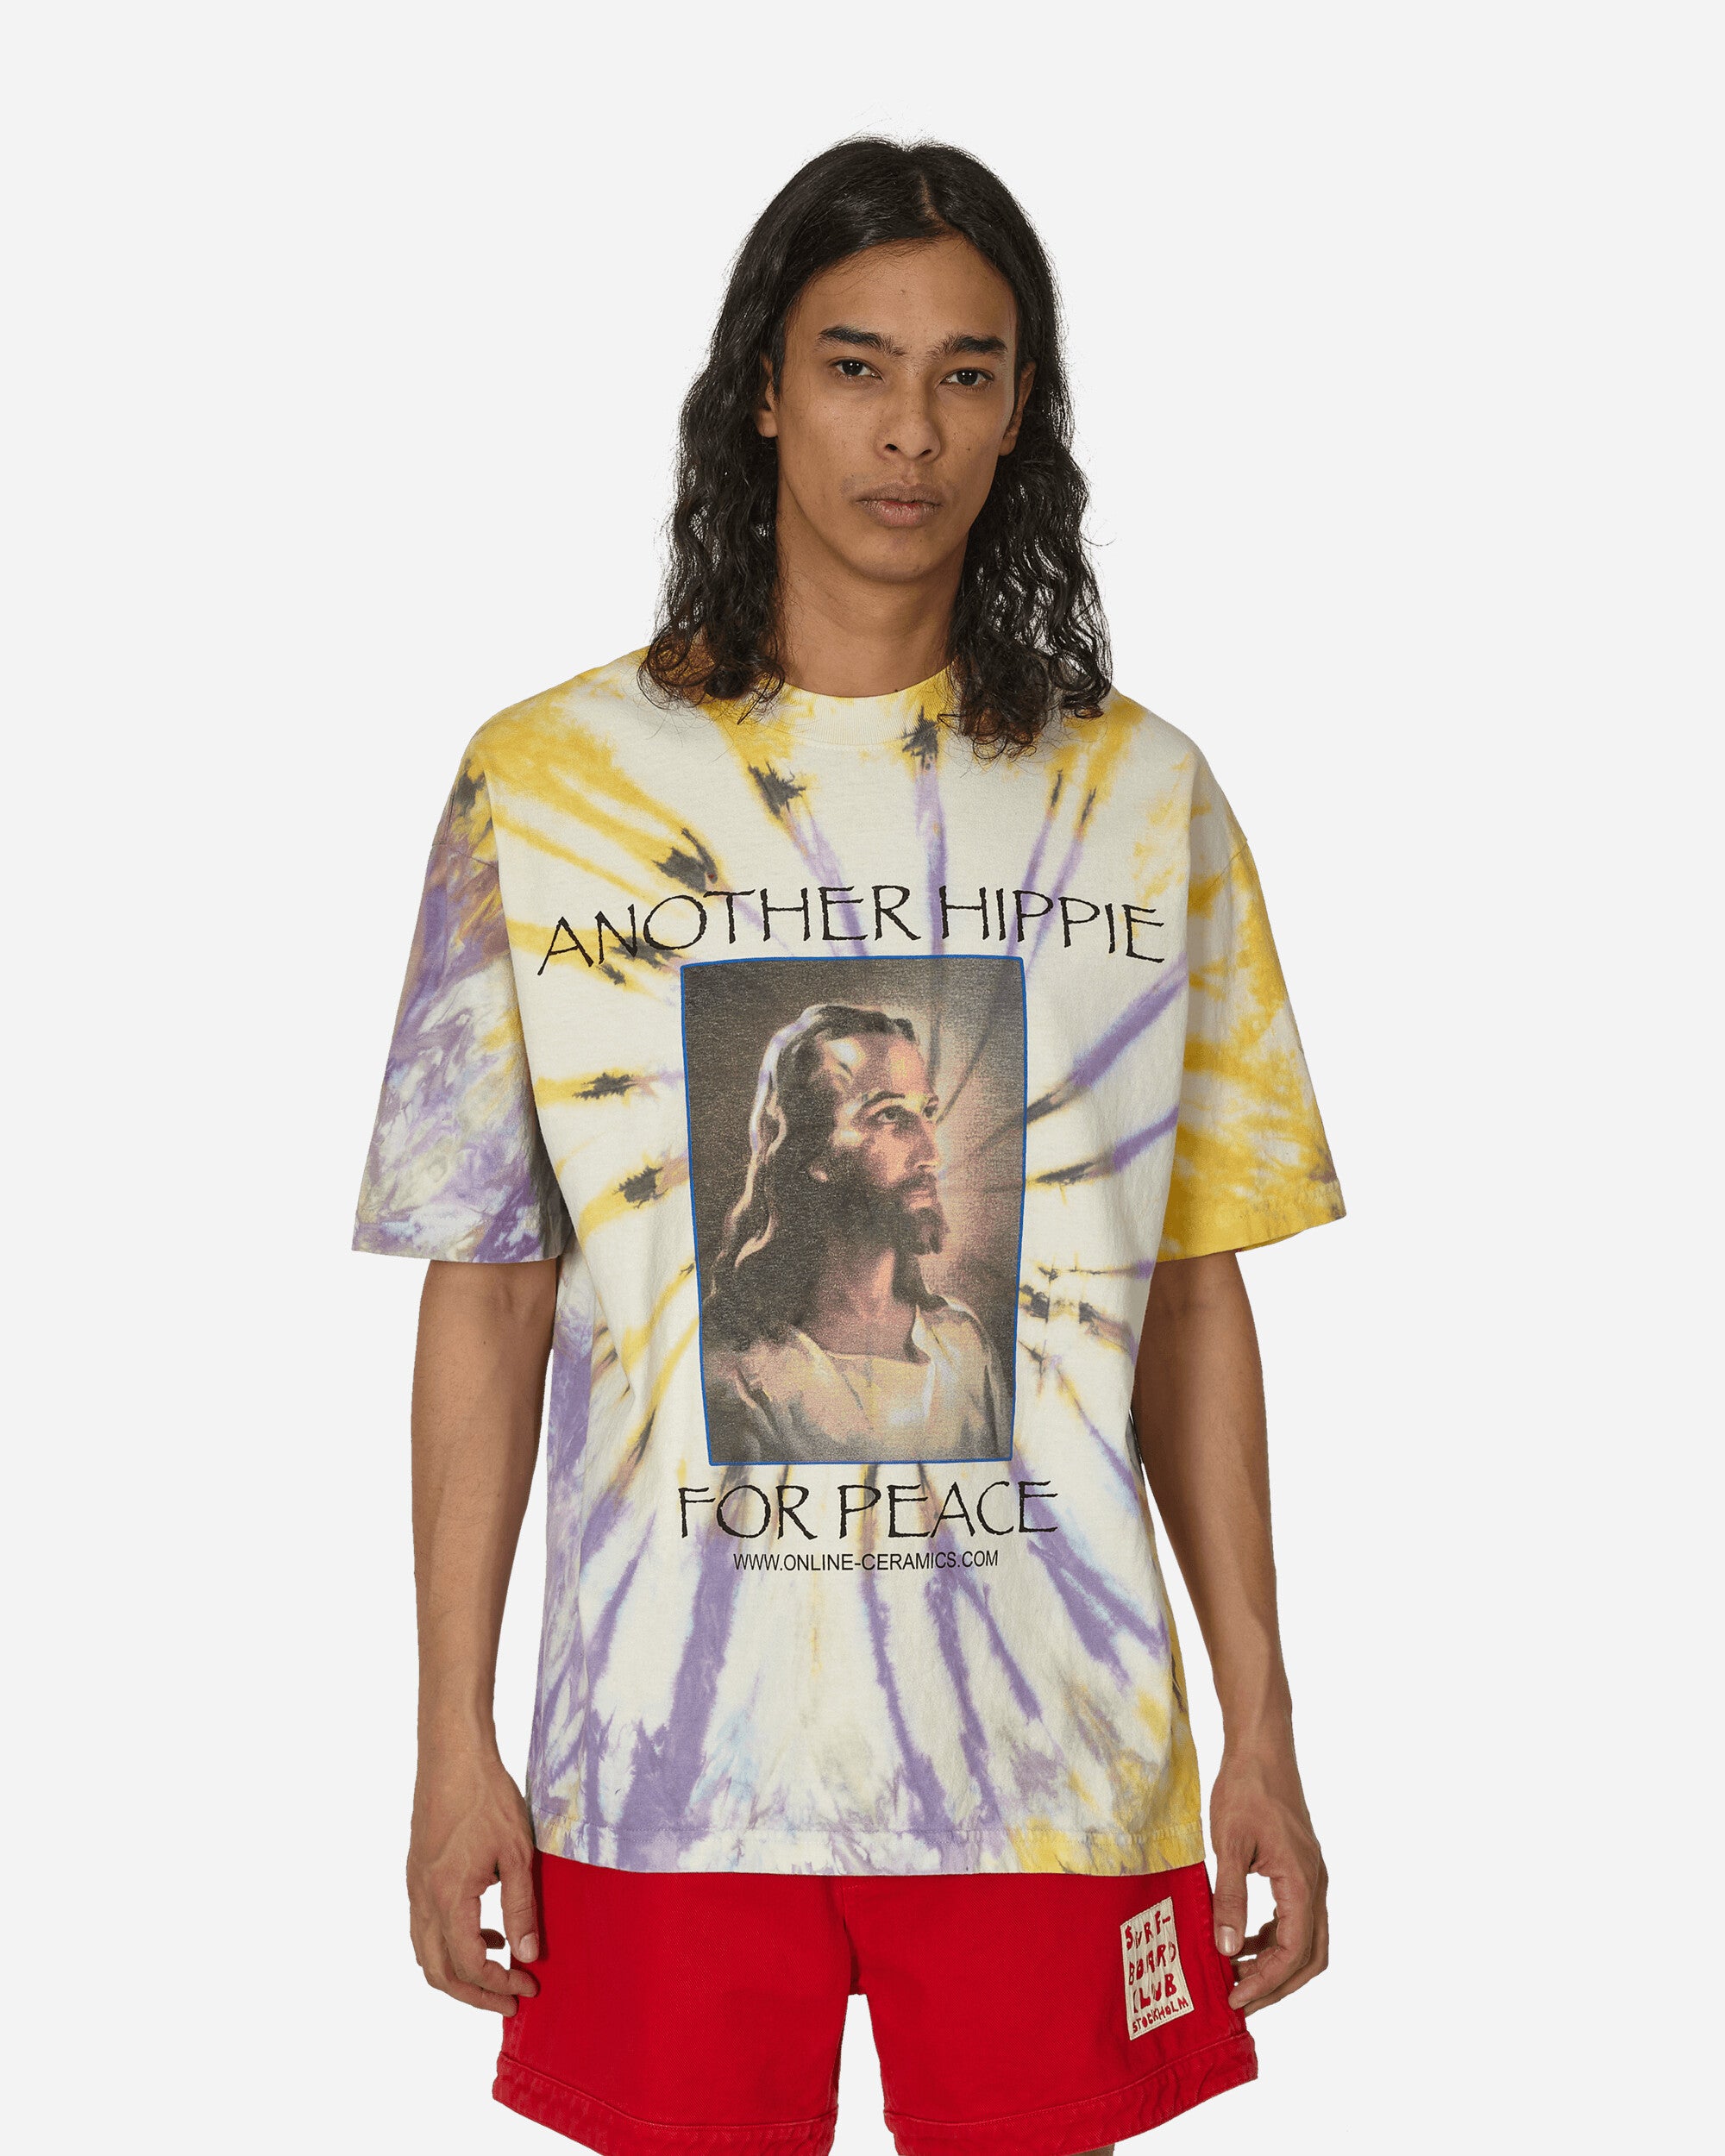 Online Ceramics Another Hippie For Peace Tie-Dye Ss Tee Tie Dye T-Shirts Shortsleeve PEACETEE TIEDYE